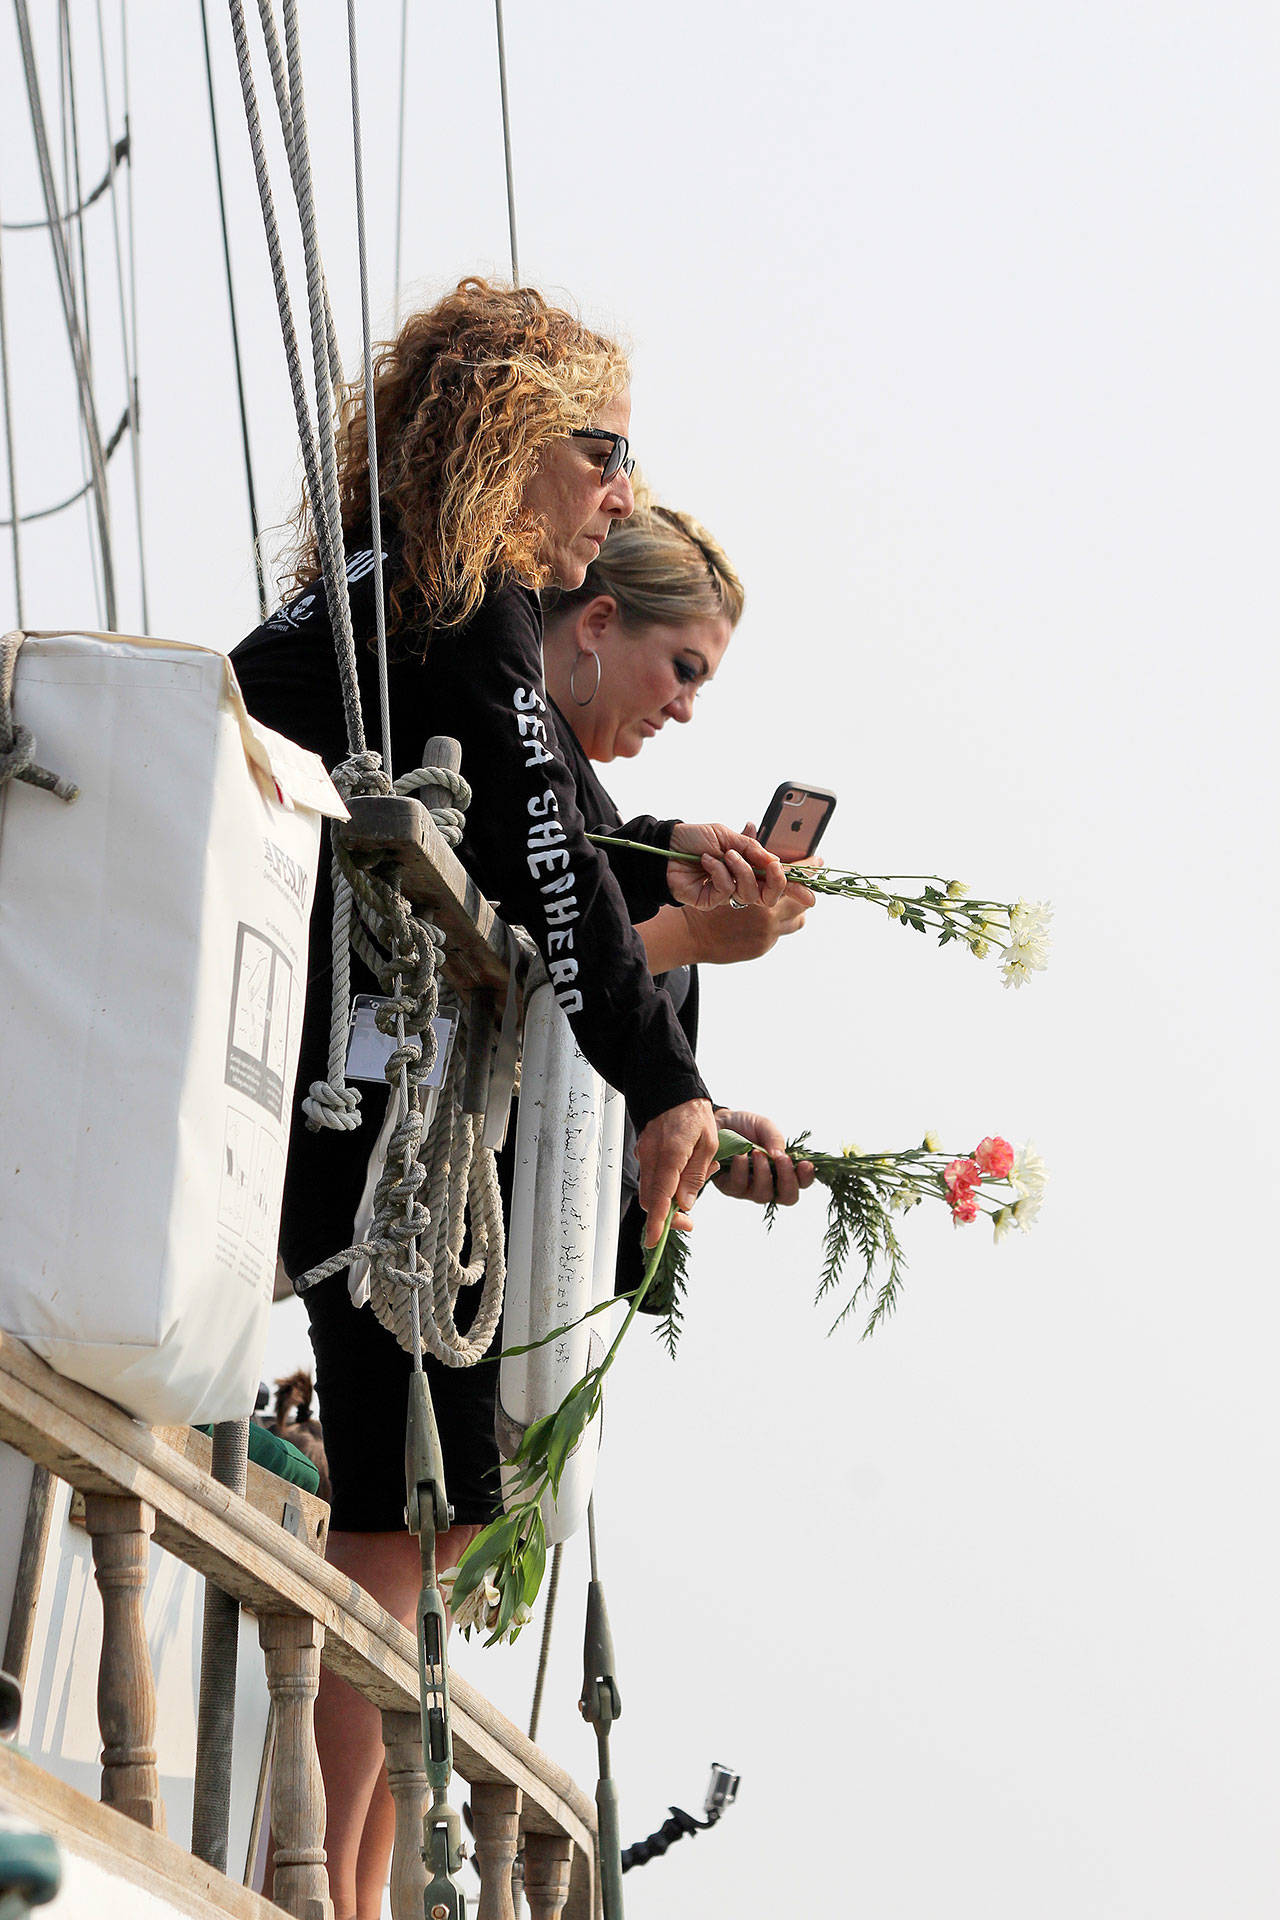 One of two sailboats filled with people who marked the occasion of the Penn Cove whale round-ups on Tuesday with flowers and other tributes. Photo by Patricia Guthrie/Whidbey News Times